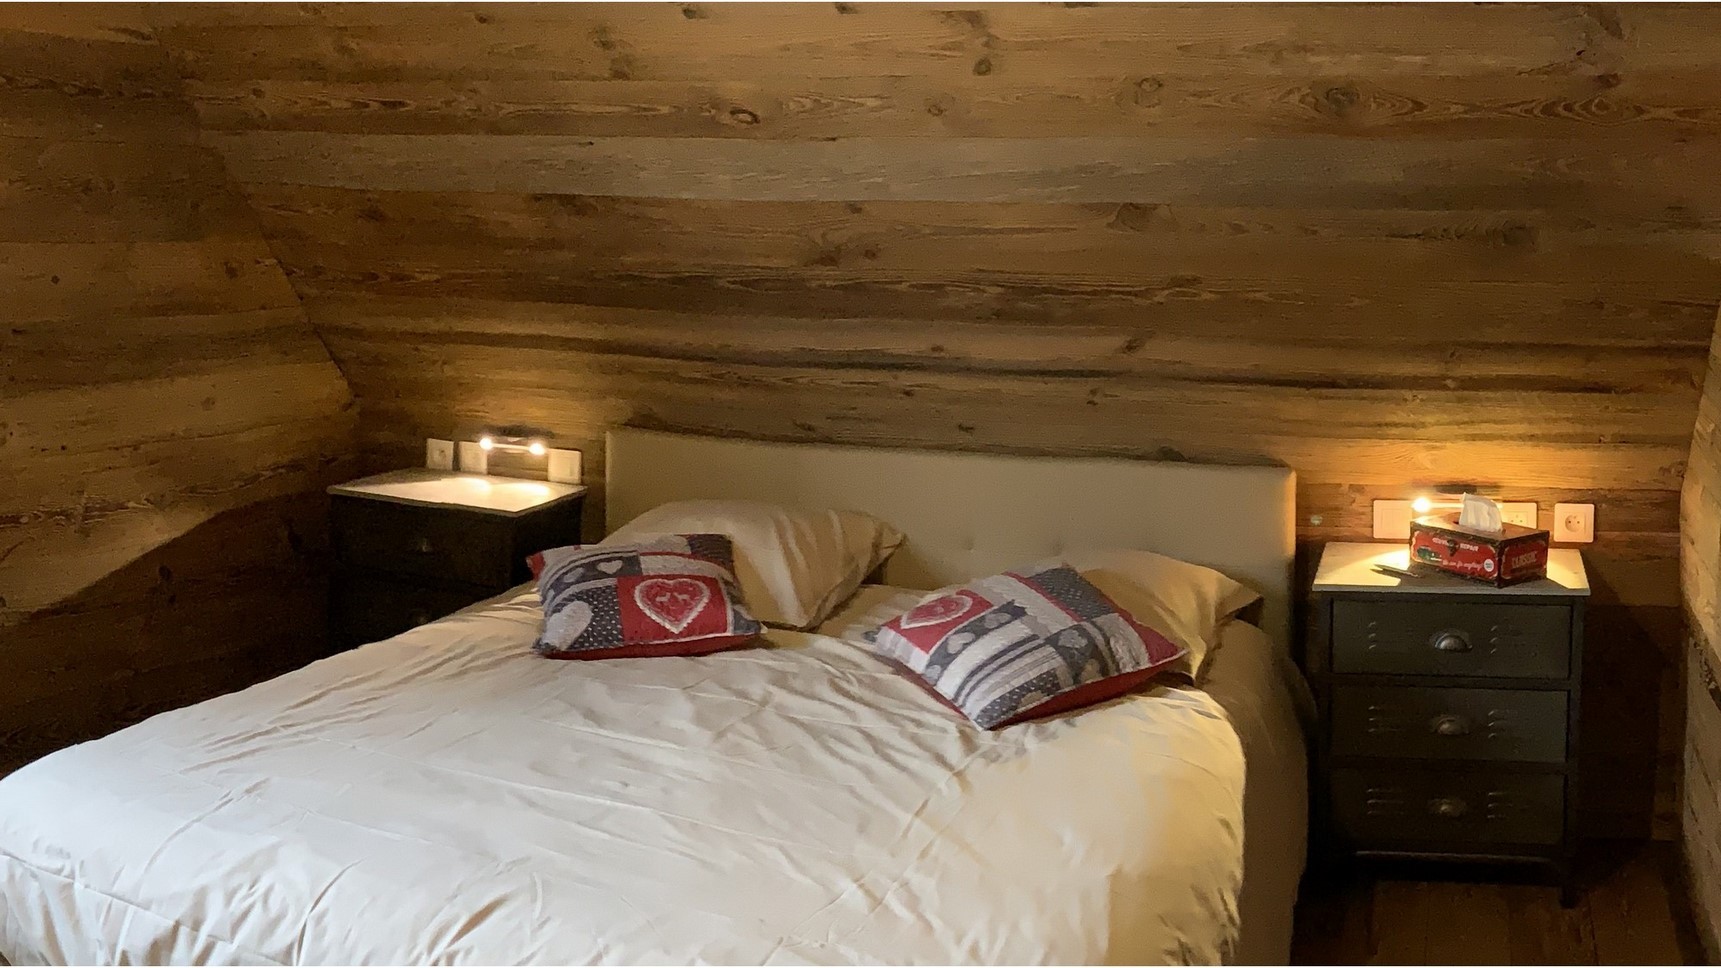 Chalet l'Anorak, Tyrolean bedroom, King Size bed and bedside table